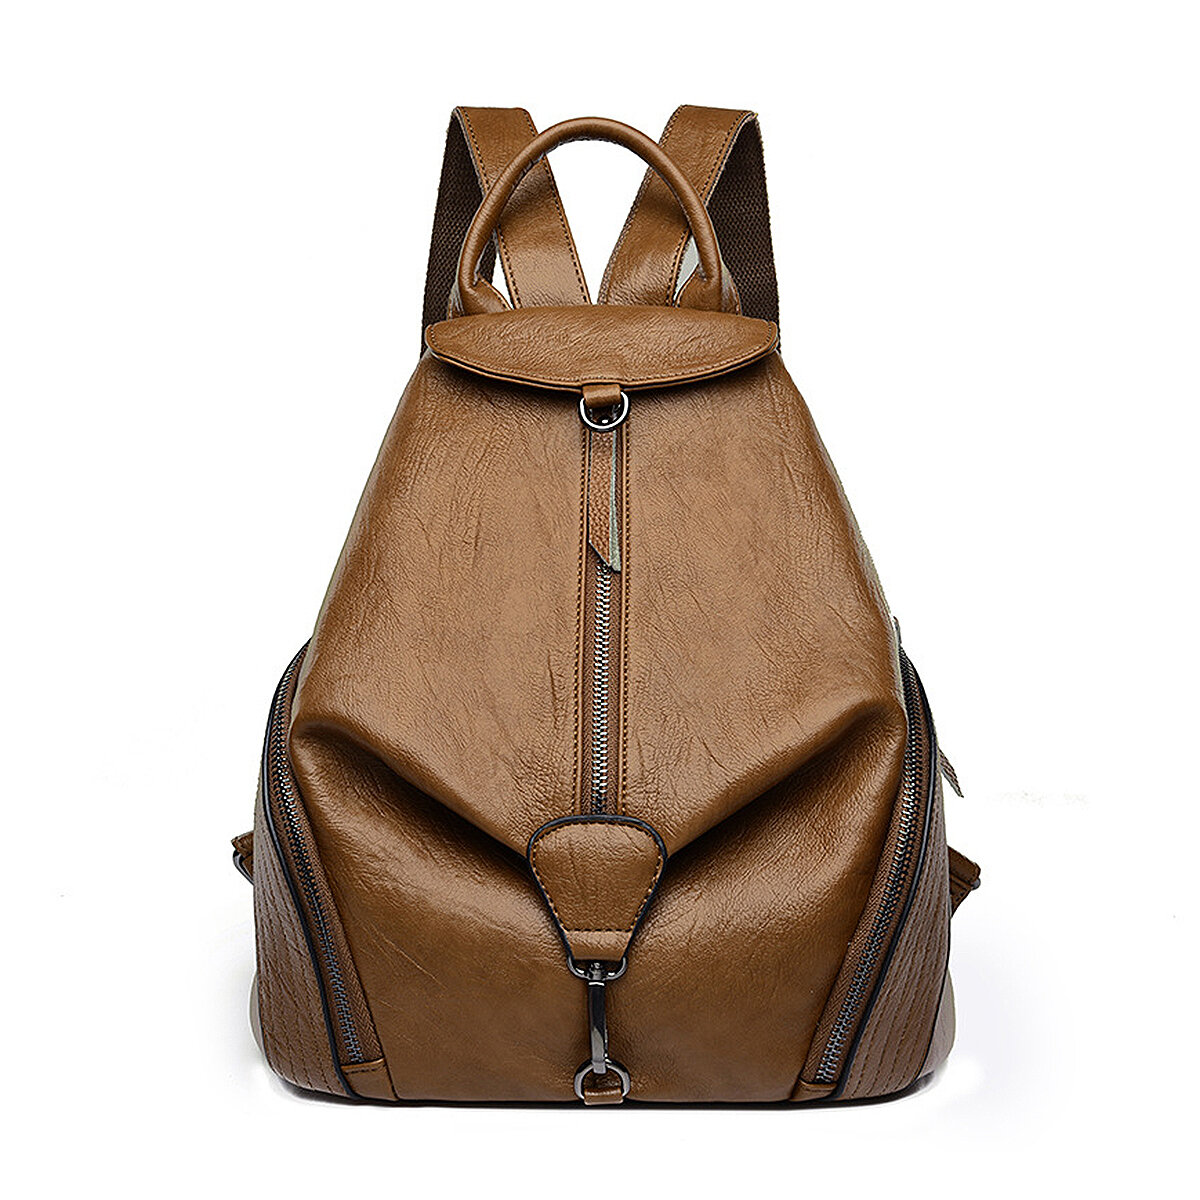 

Women Anti-Theft Leather Backpack Kadell Fashion Ladies Purse Anti Theft Bag Casual Travel Rucksack Shopping Daypack